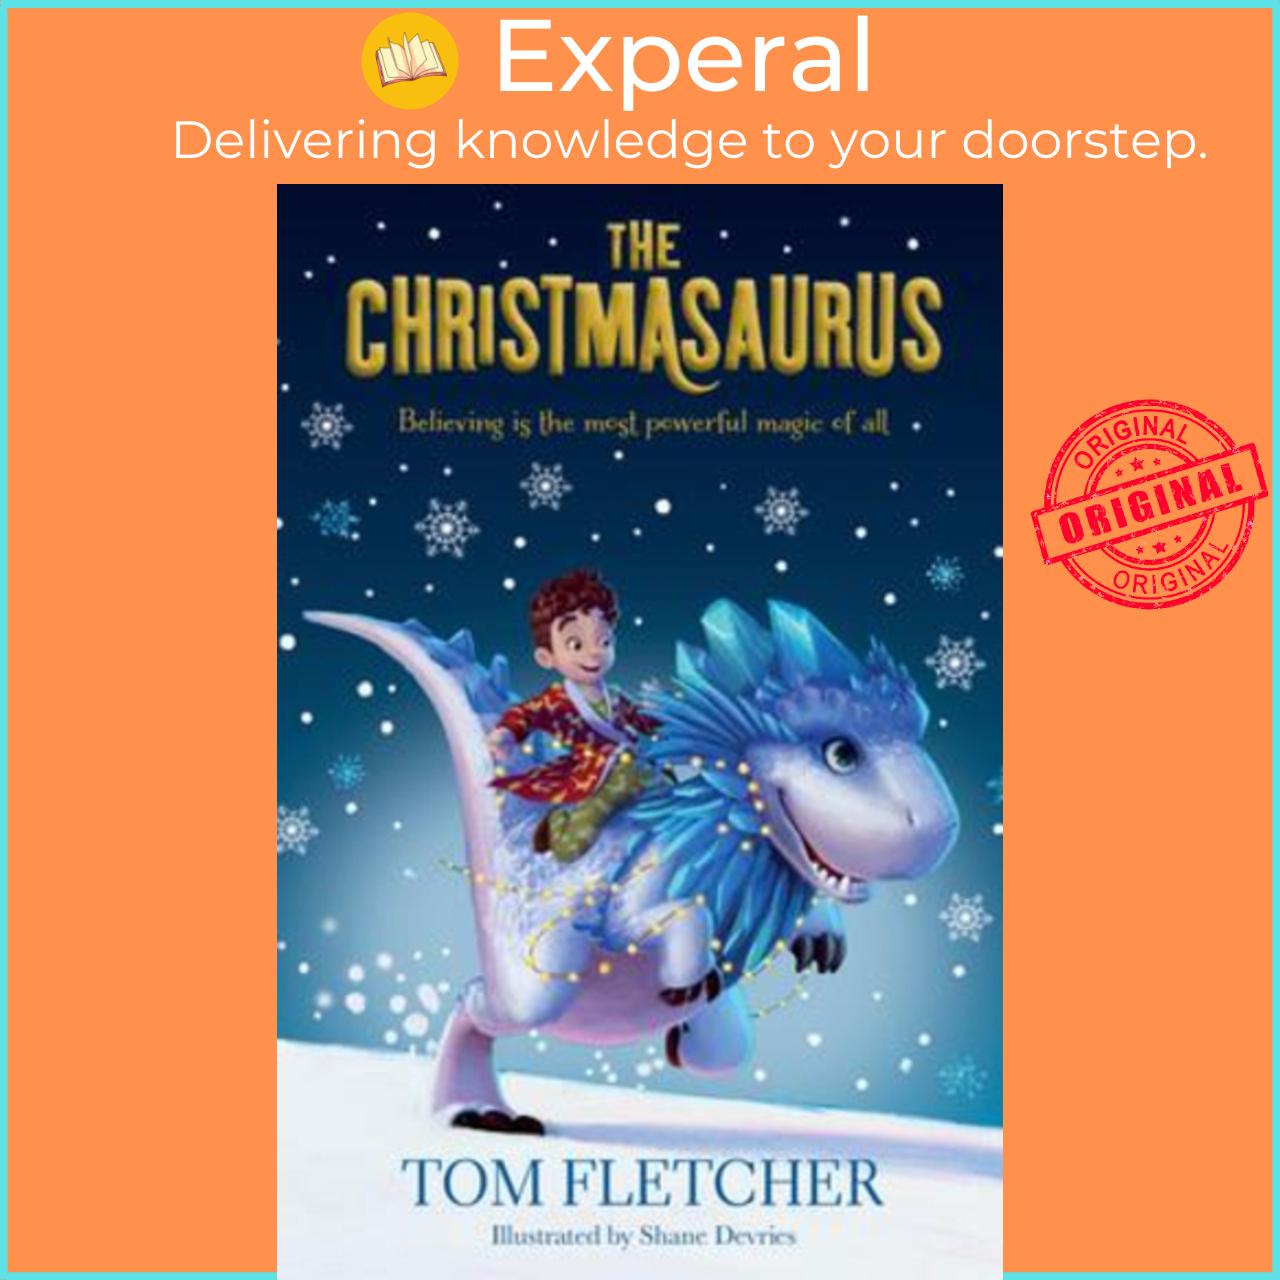 Sách - The Christmasaurus by Tom Fletcher (US edition, hardcover)